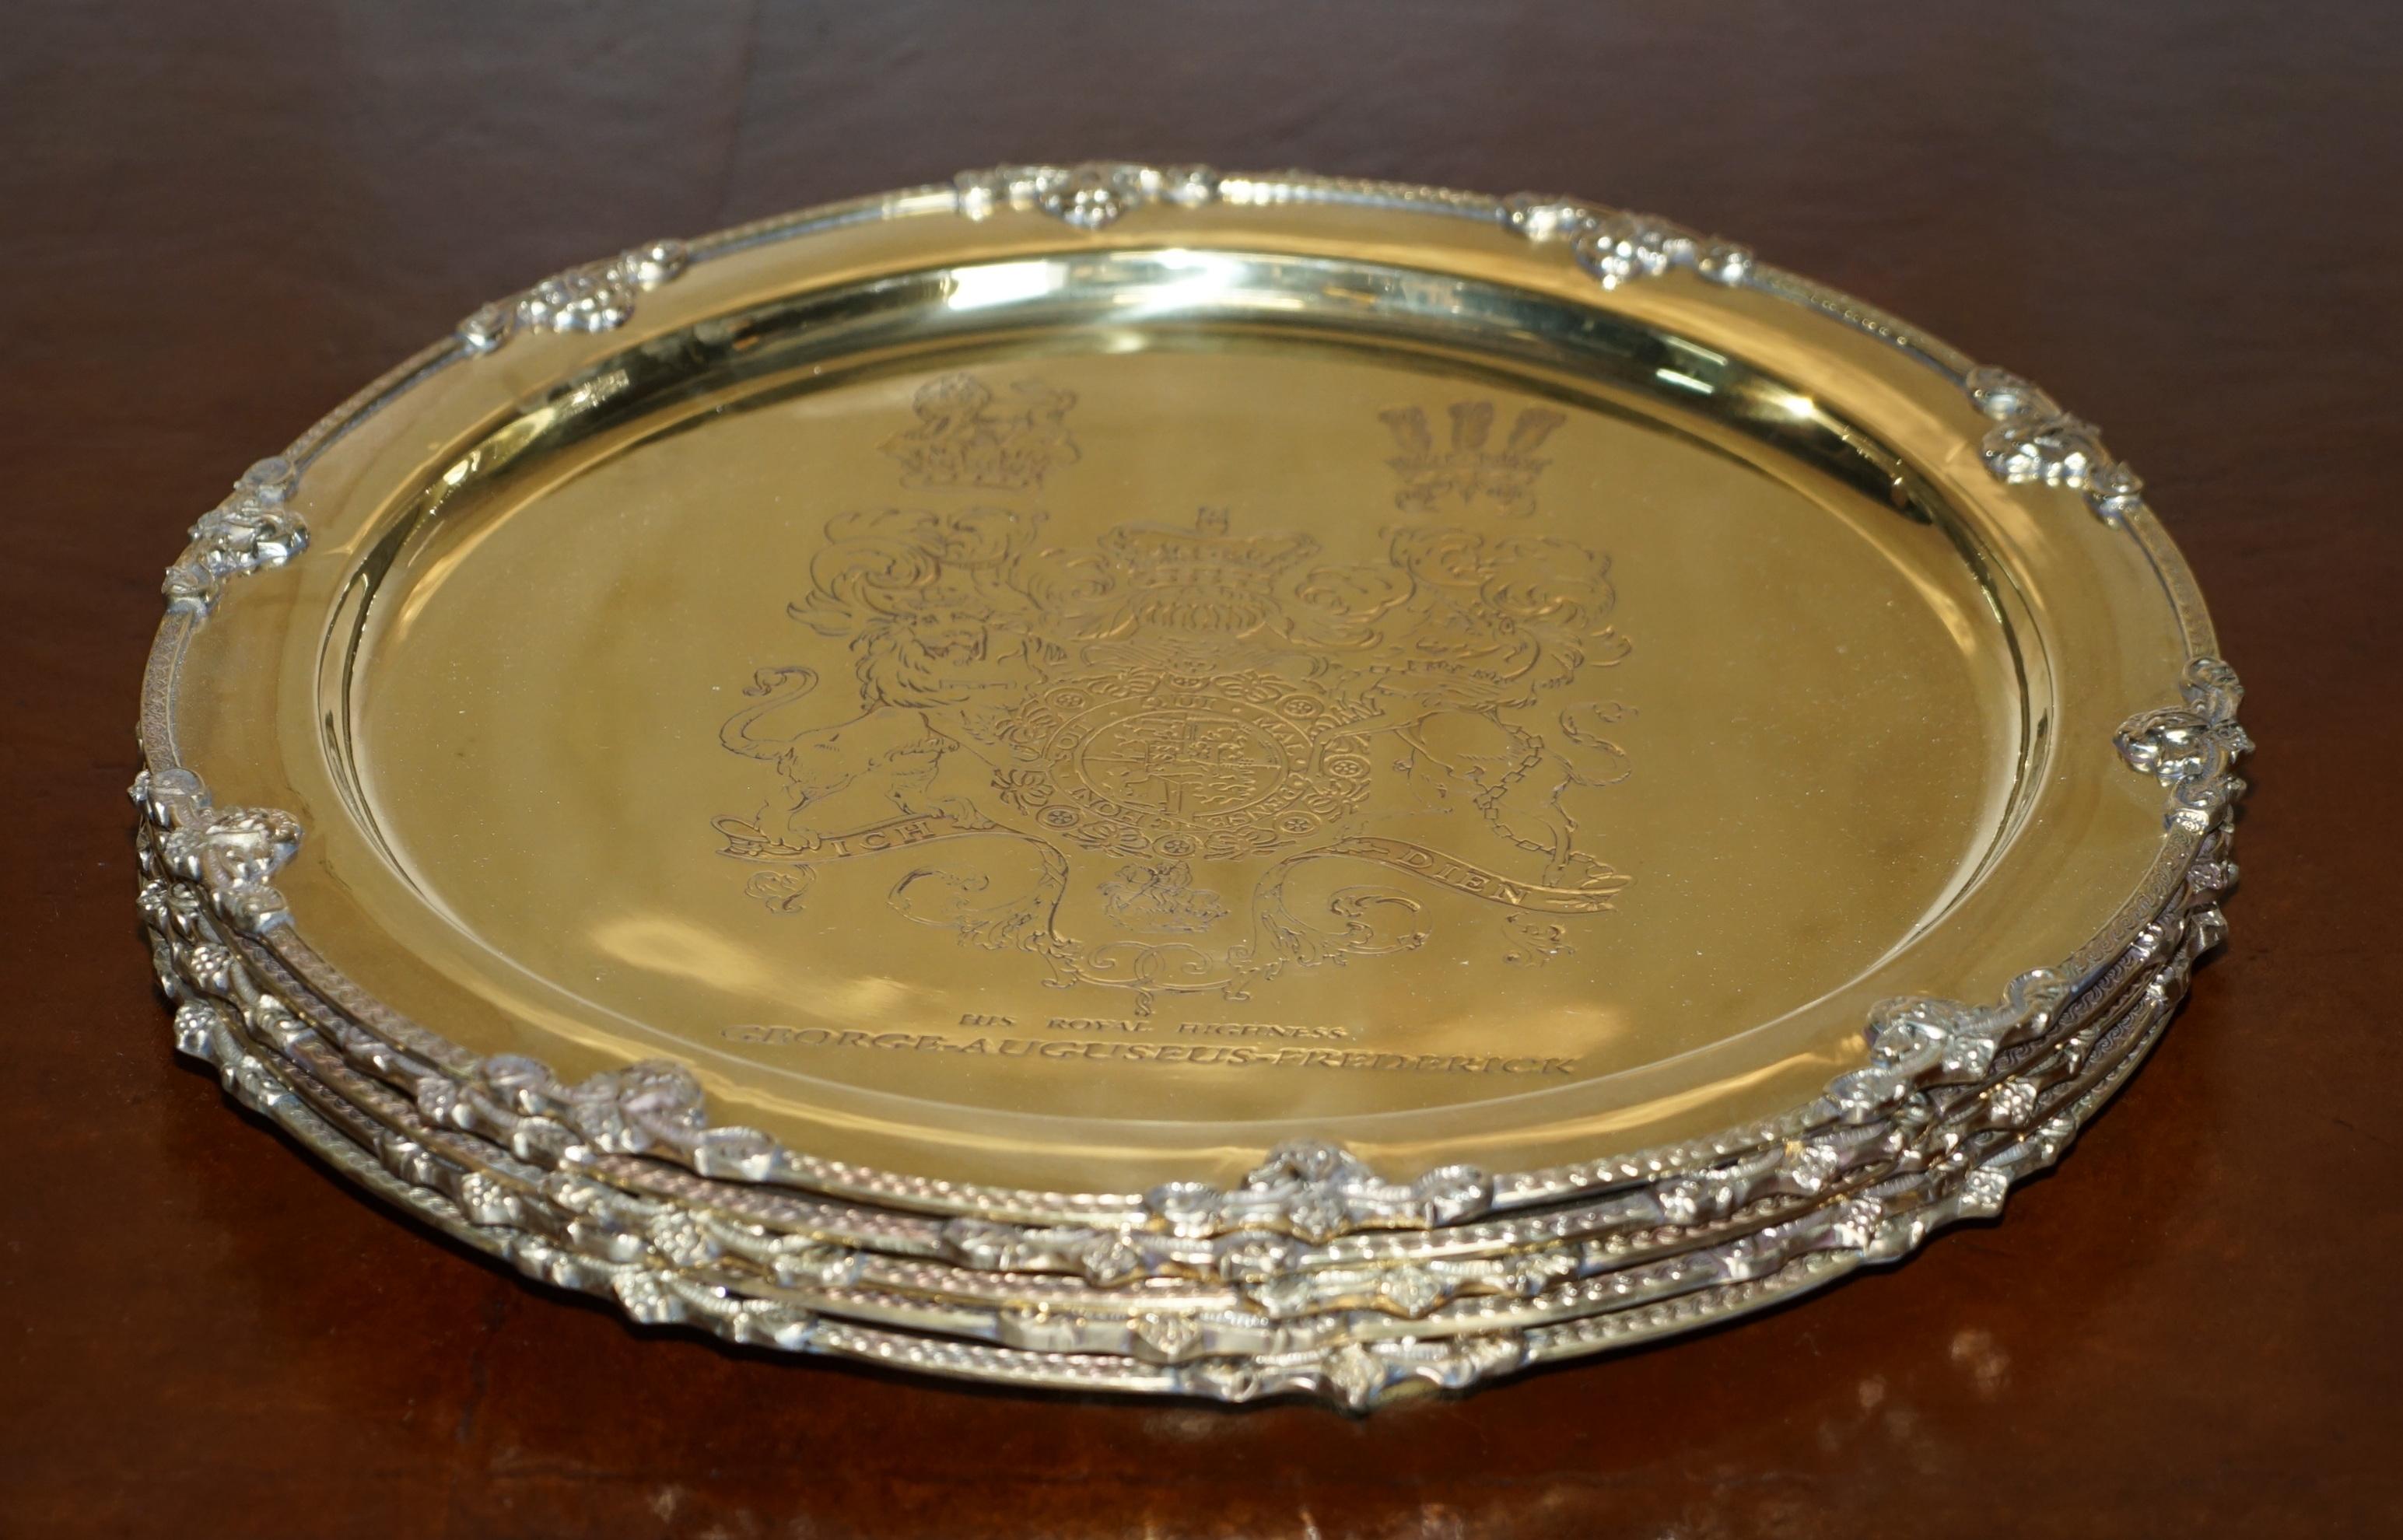 We are delighted to offer for sale 1 of 4 Gold gilt Sterling Silver plated, fully hallmarked for Sheffield 1919 Serving trays with engraved Armorial coat of arms crest for King George IV “His Royal Highness George Auguseue Frederick”

These are